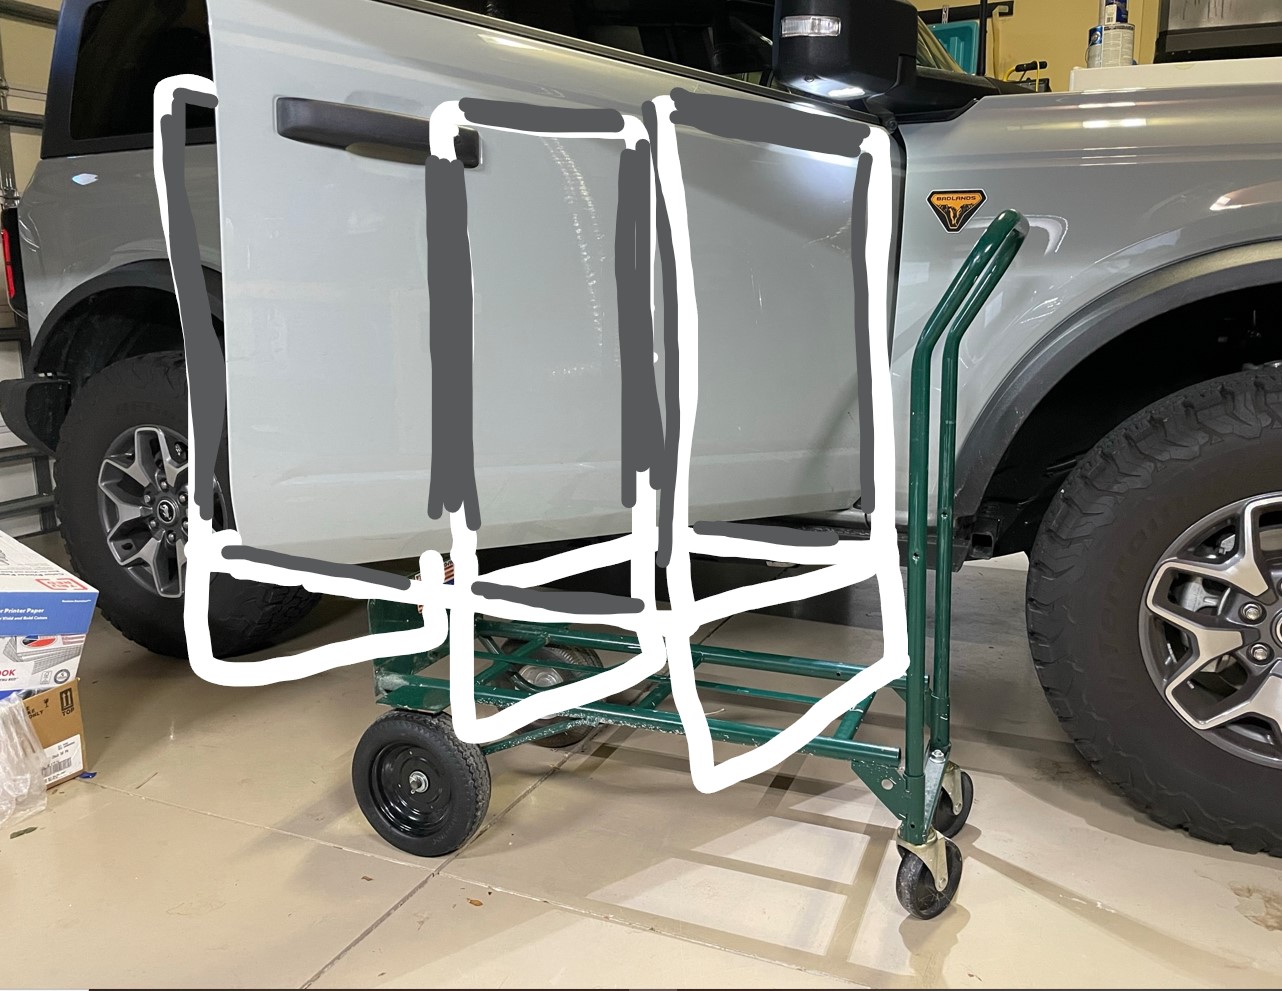 Ford Bronco Door Storage Holder PVC Cart for Garage - DIY Instructions & Photos PVC frame to set on dolly cart w approx dimensions